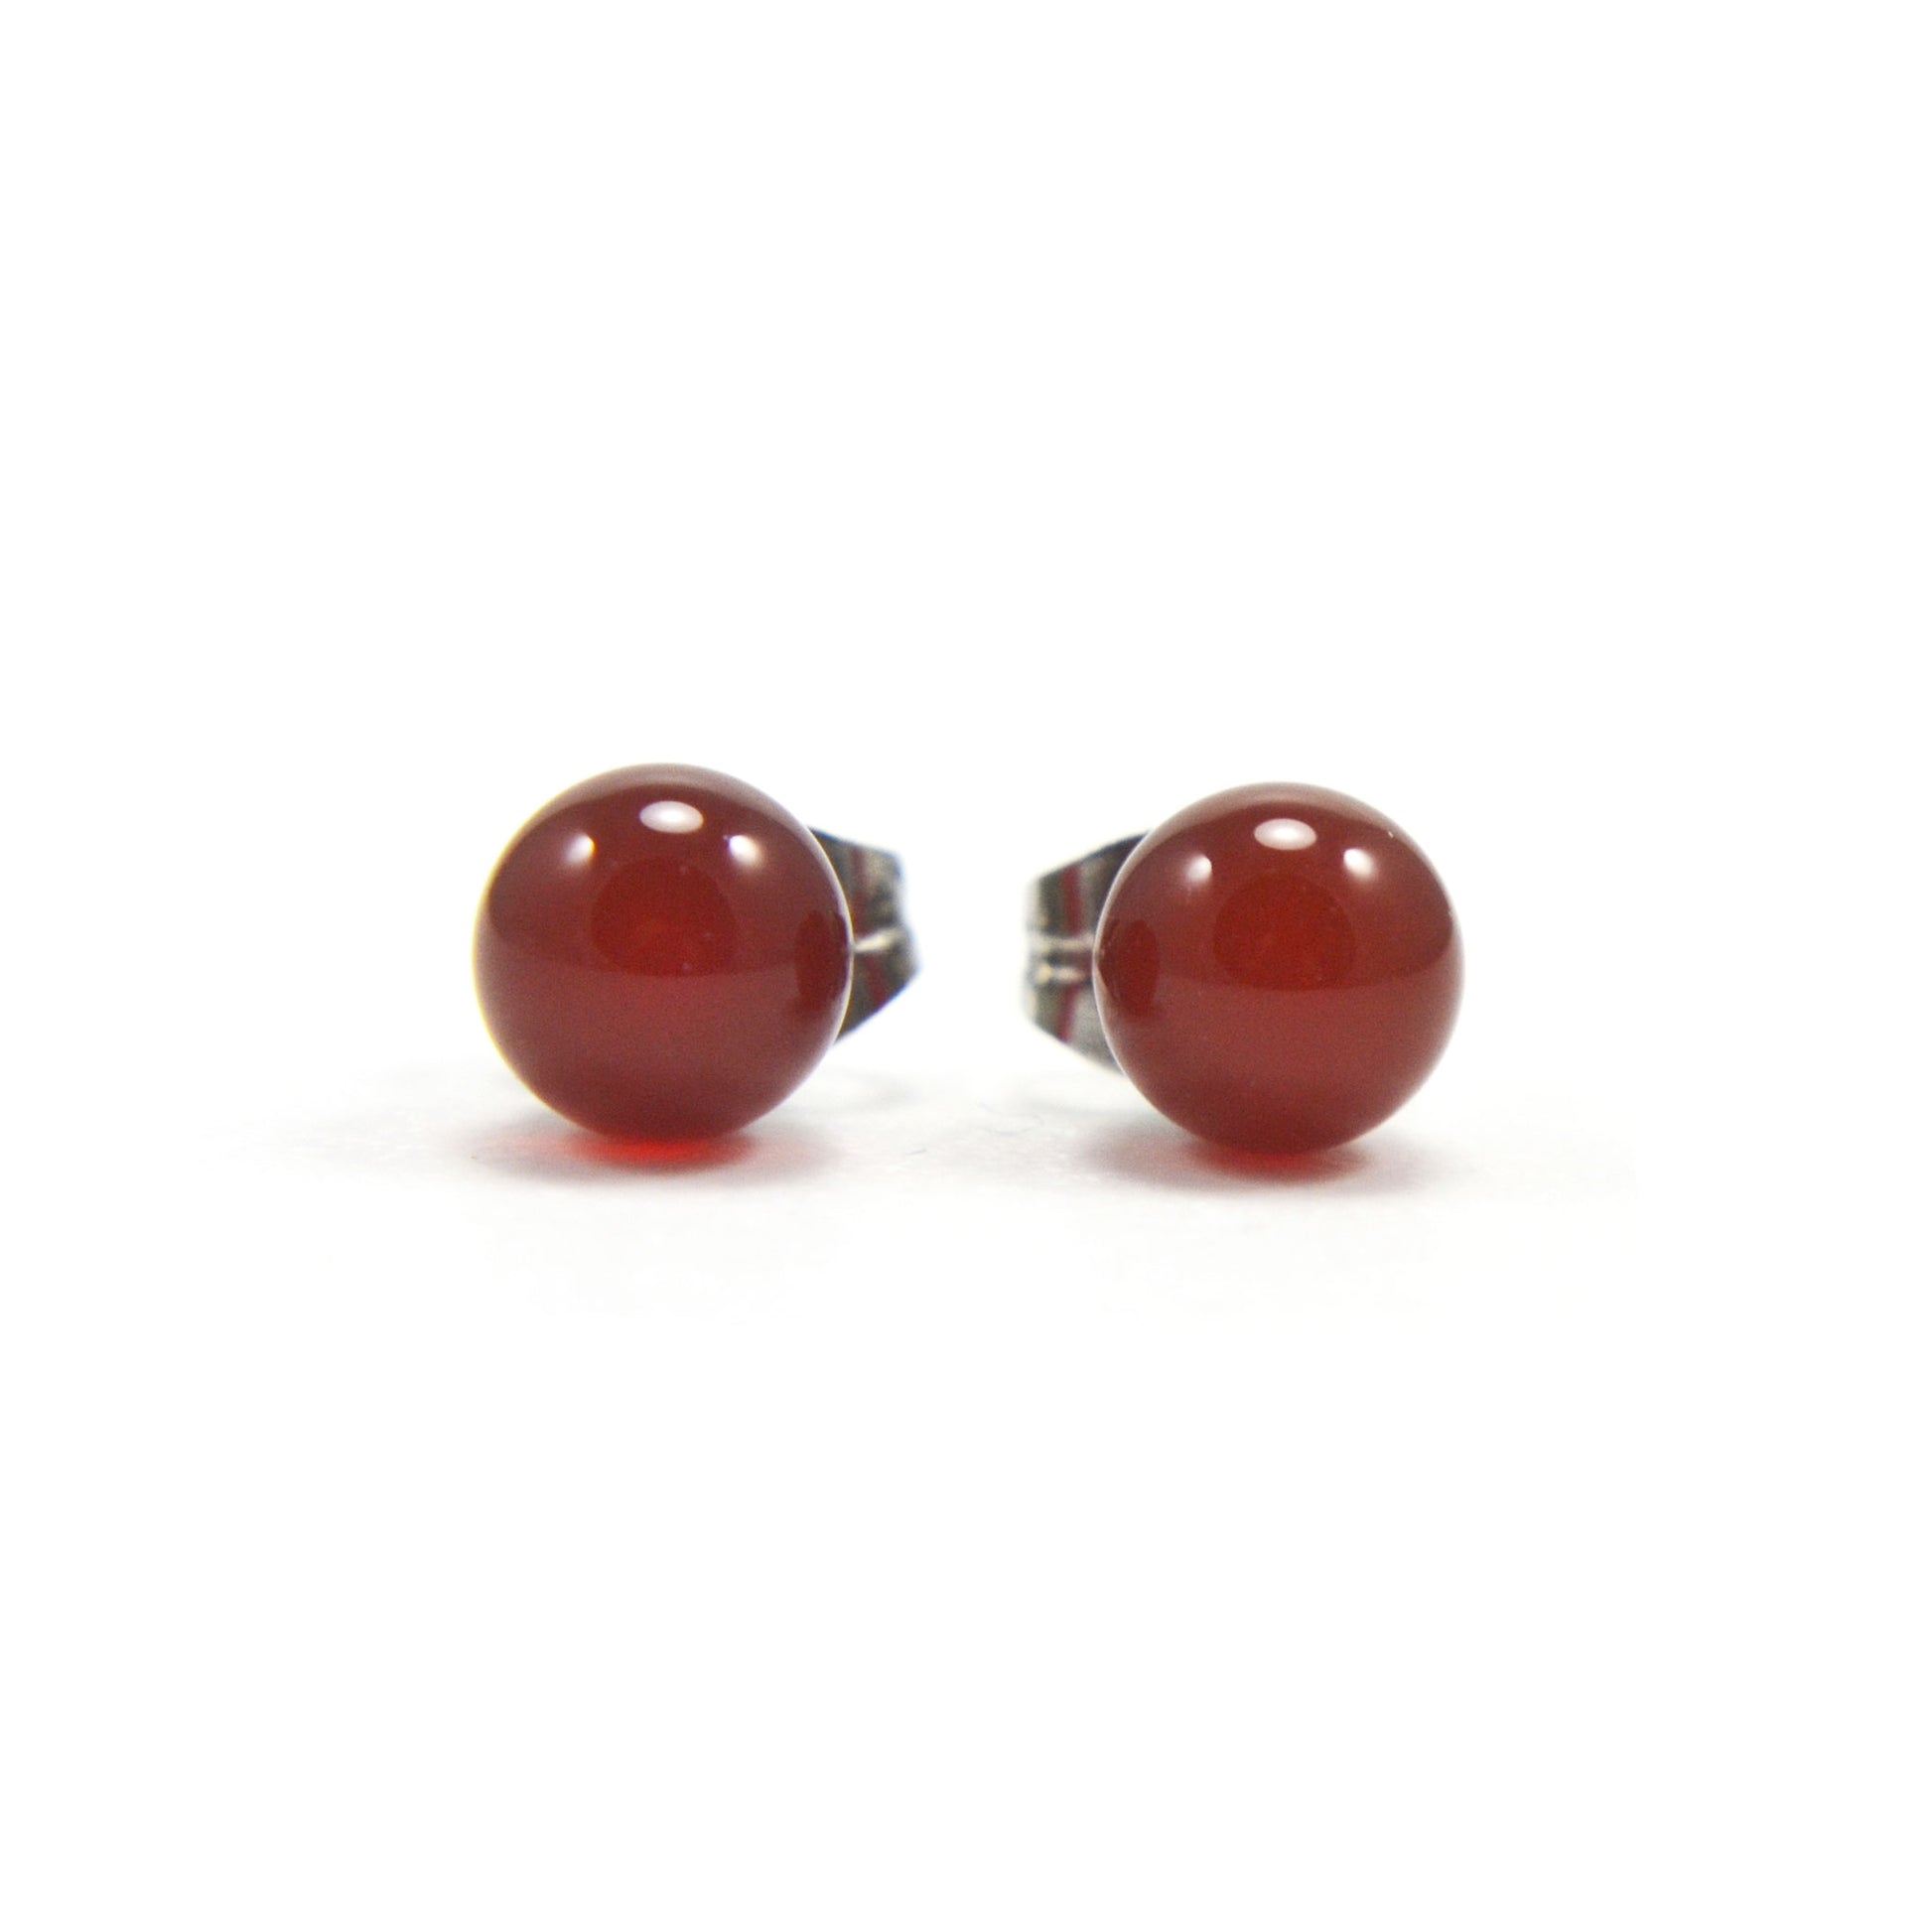 Front view of Carnelian ball stud earrings on white back background